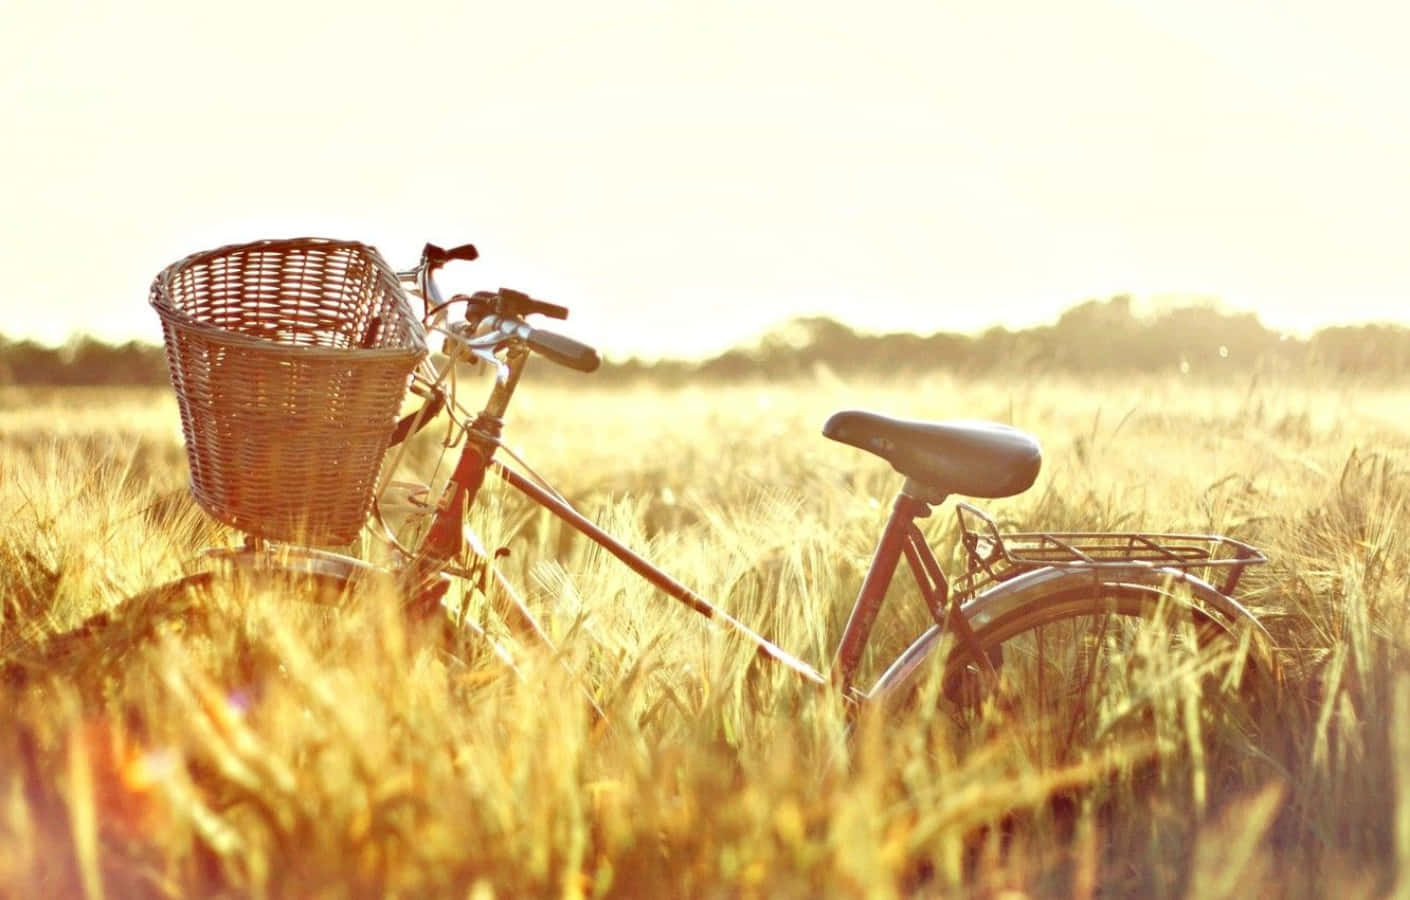 A Bicycle Is Parked In A Field Of Wheat